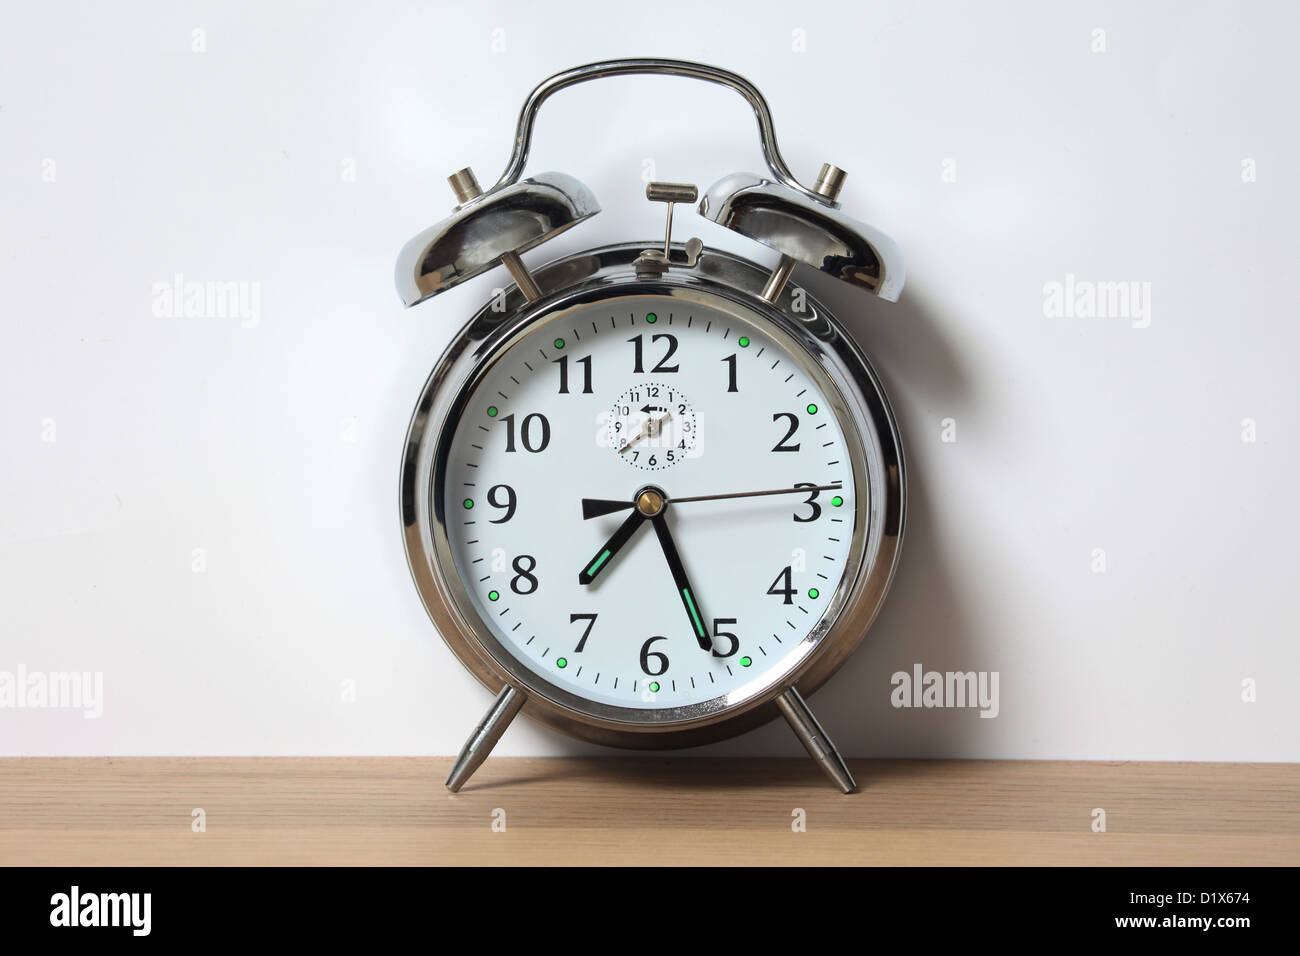 Old style chrome alarm clock with two bells. Stock Photo